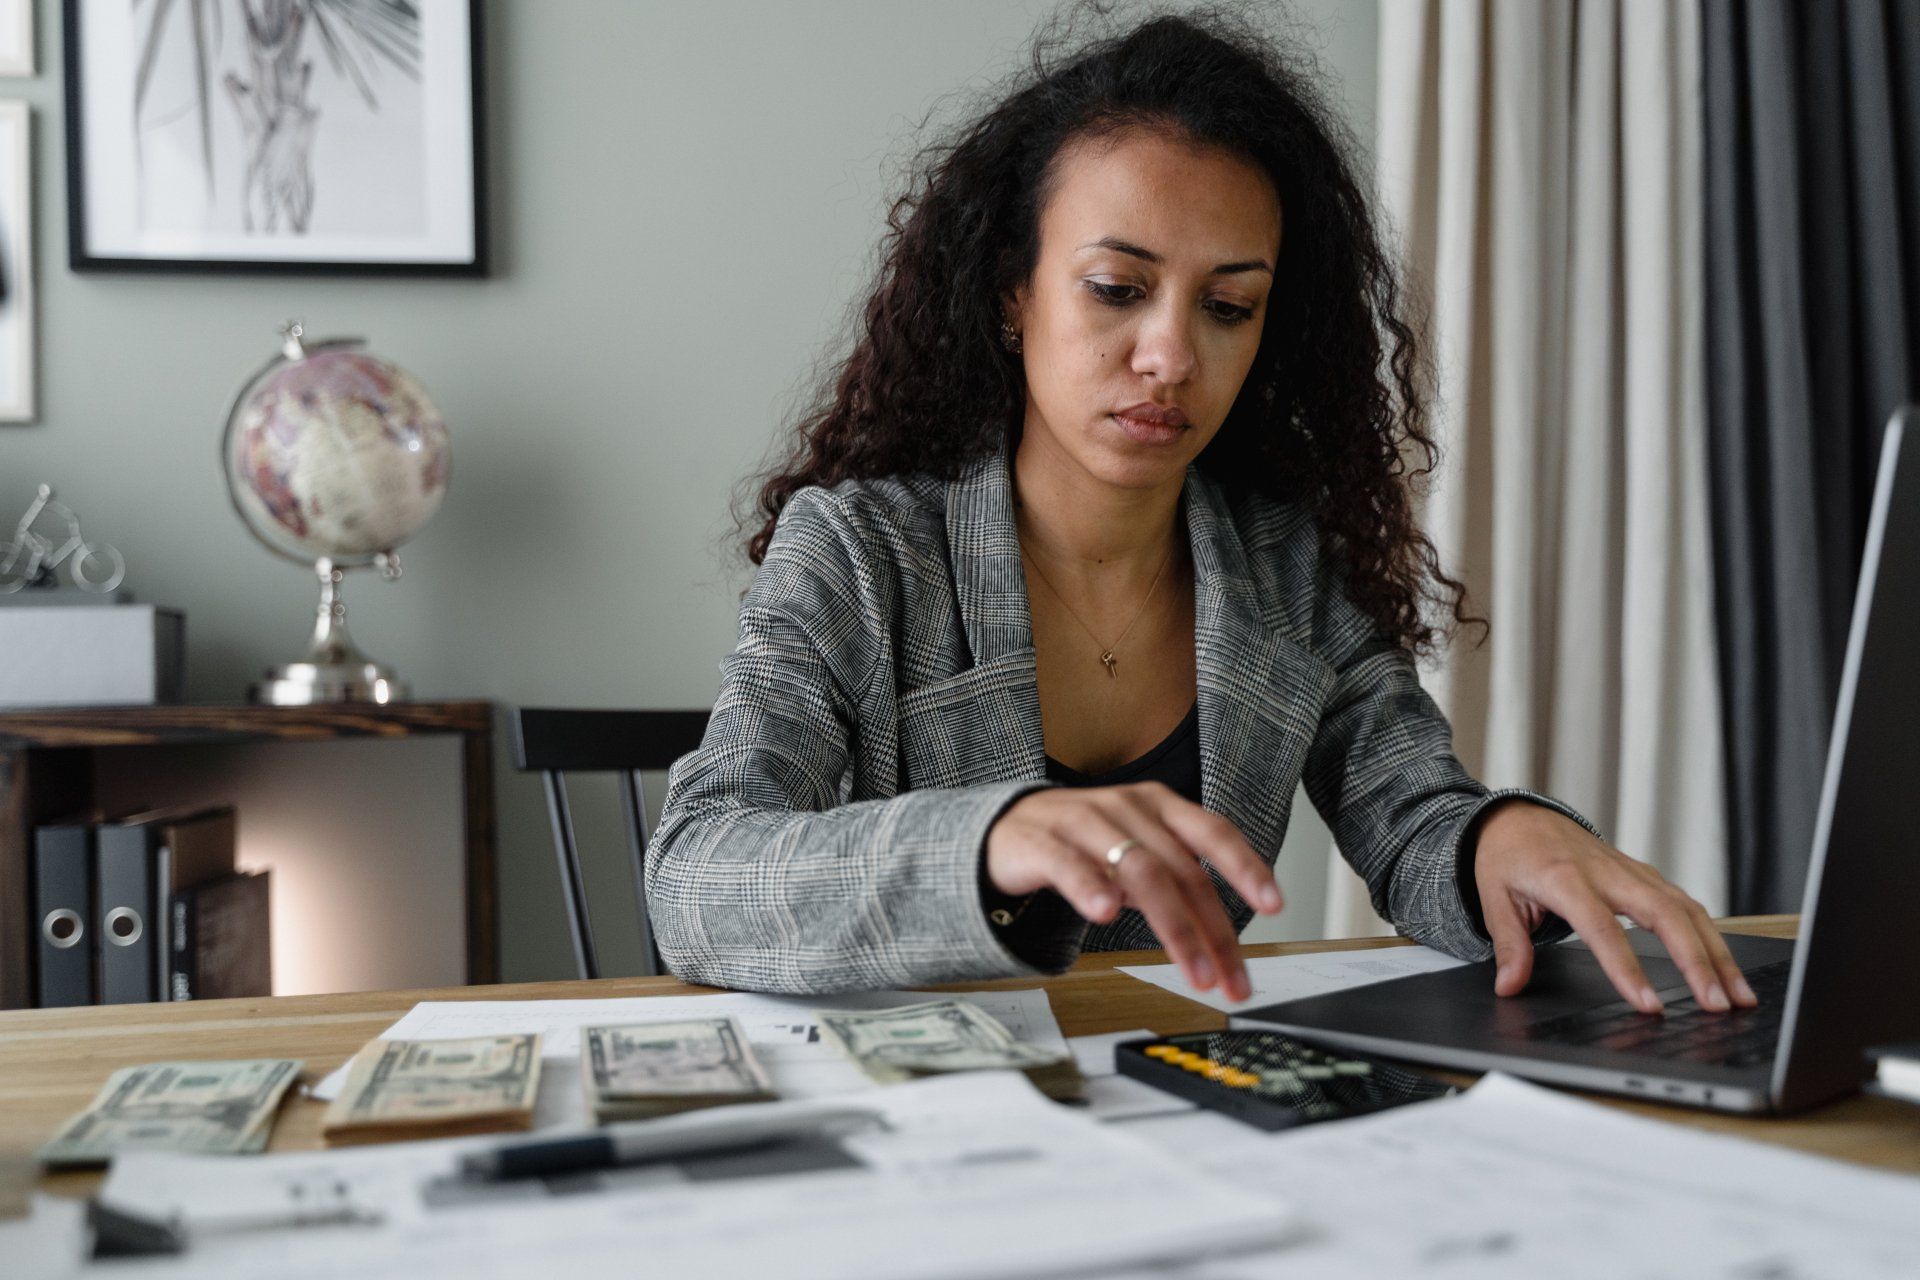 Woman working on computer and counting money.